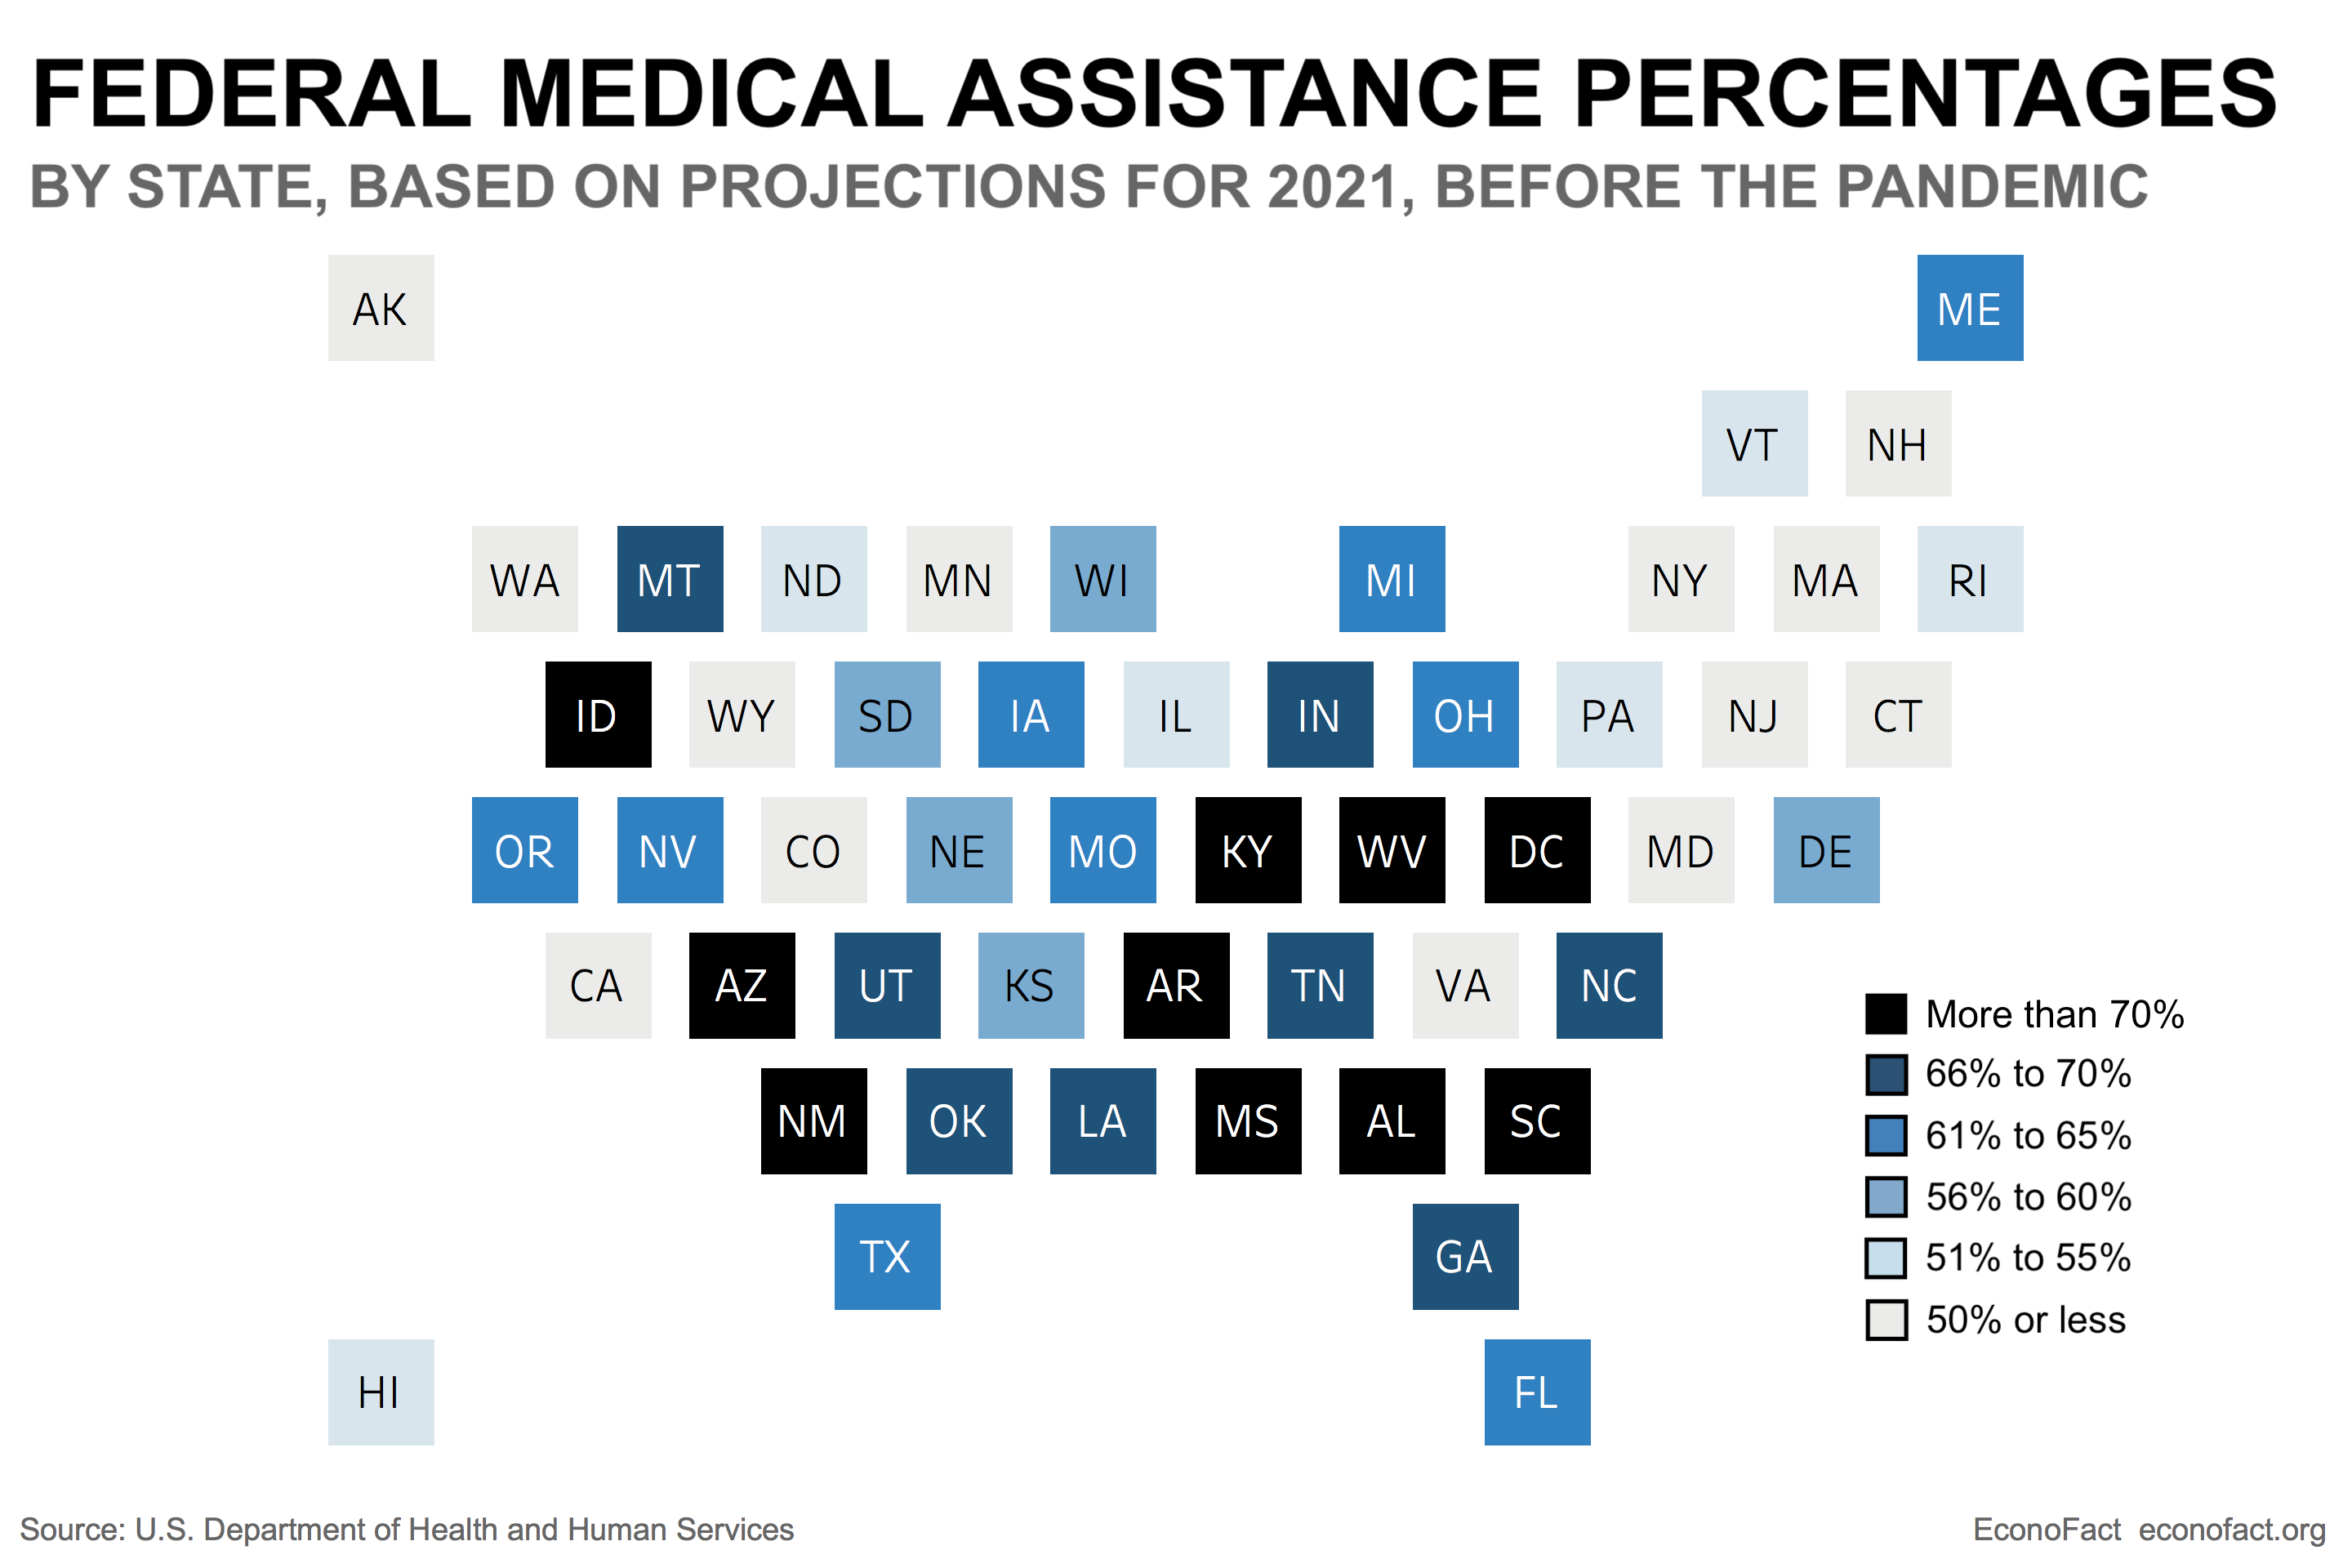 COVID-19 and Medicaid: Can State Budgets Handle It?